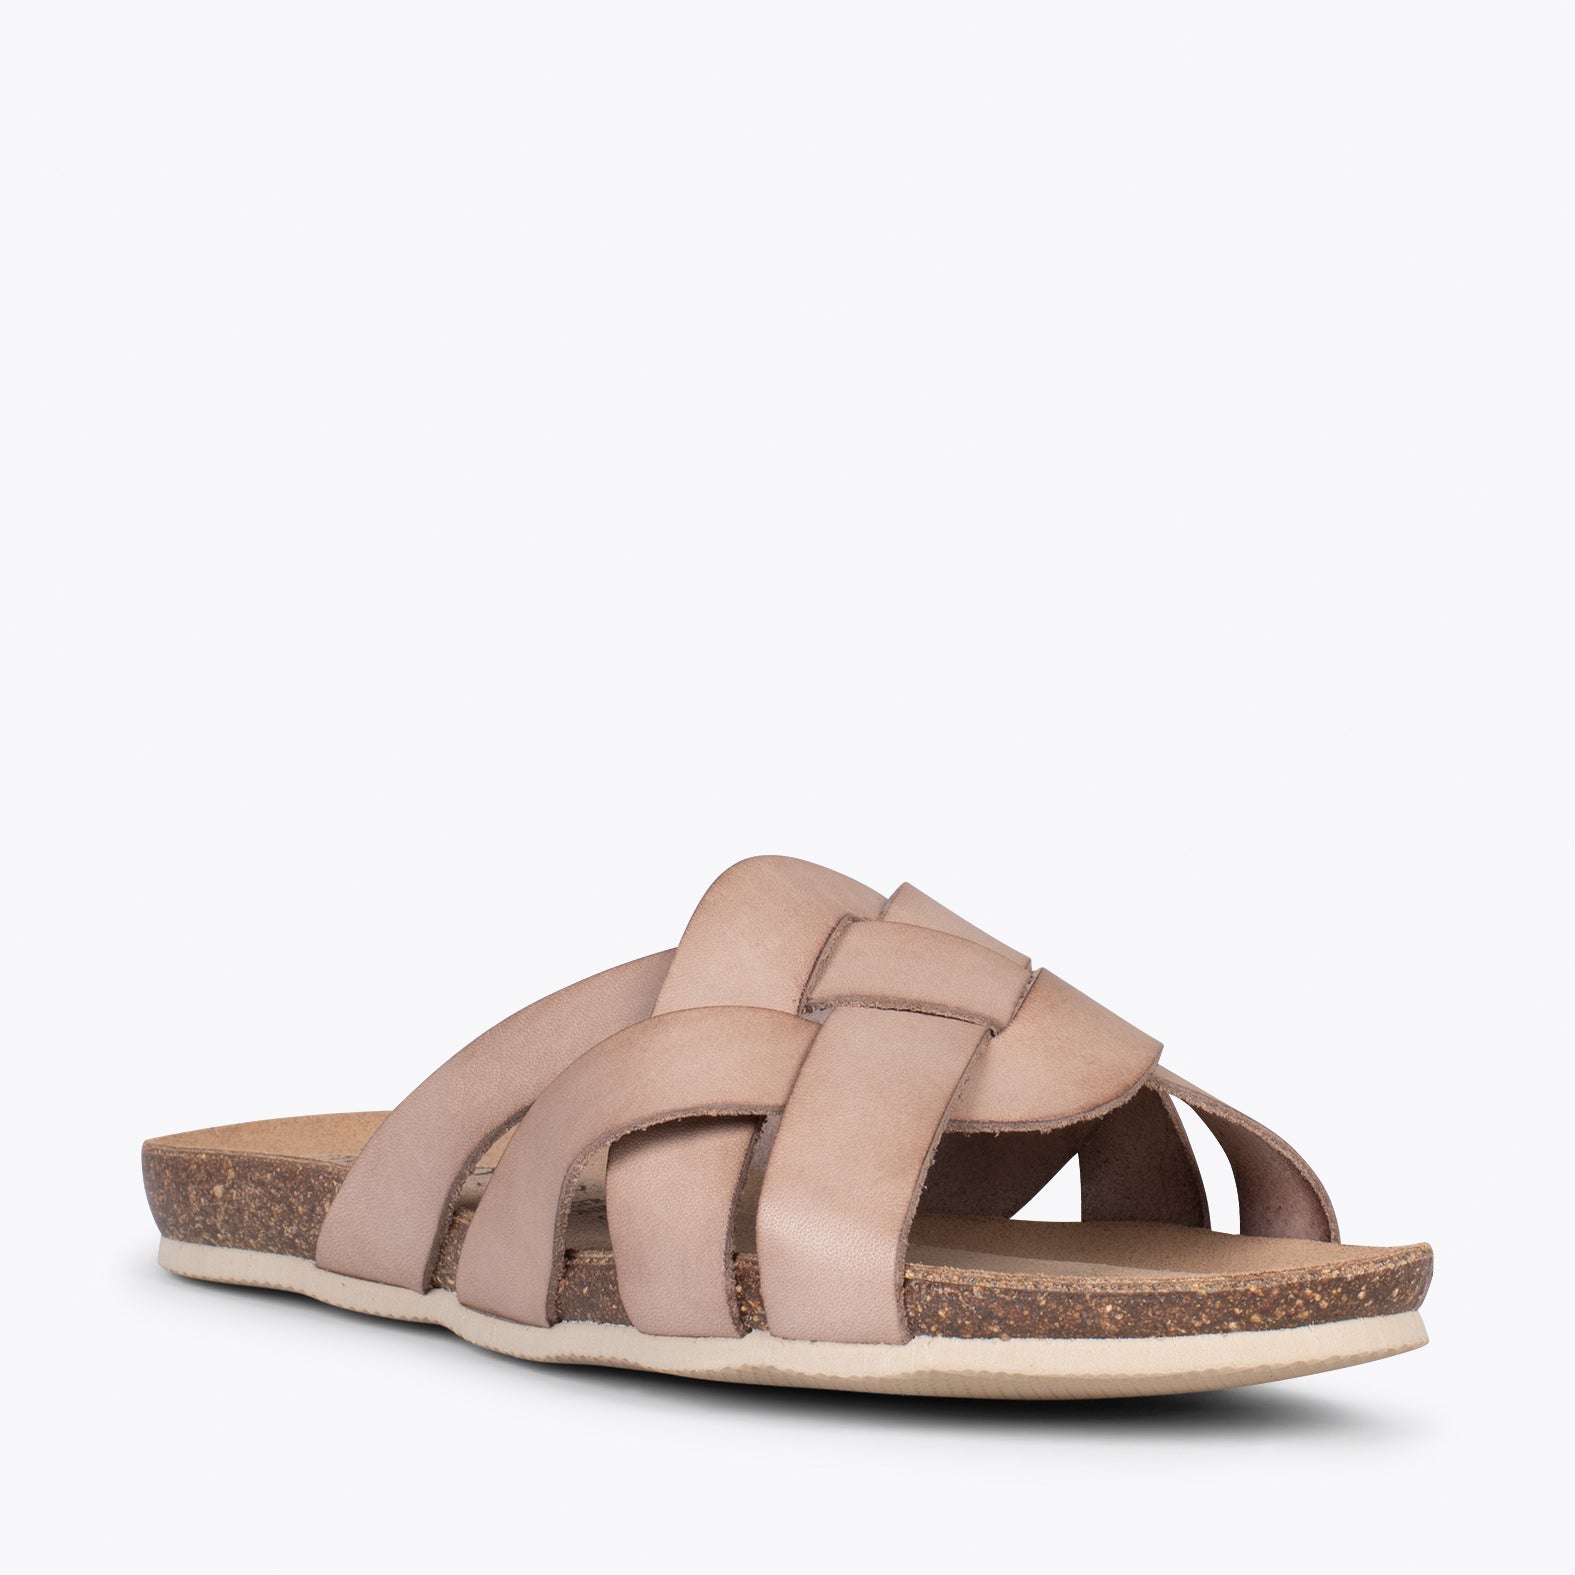 DHALIA – TAUPE slides with braided upper